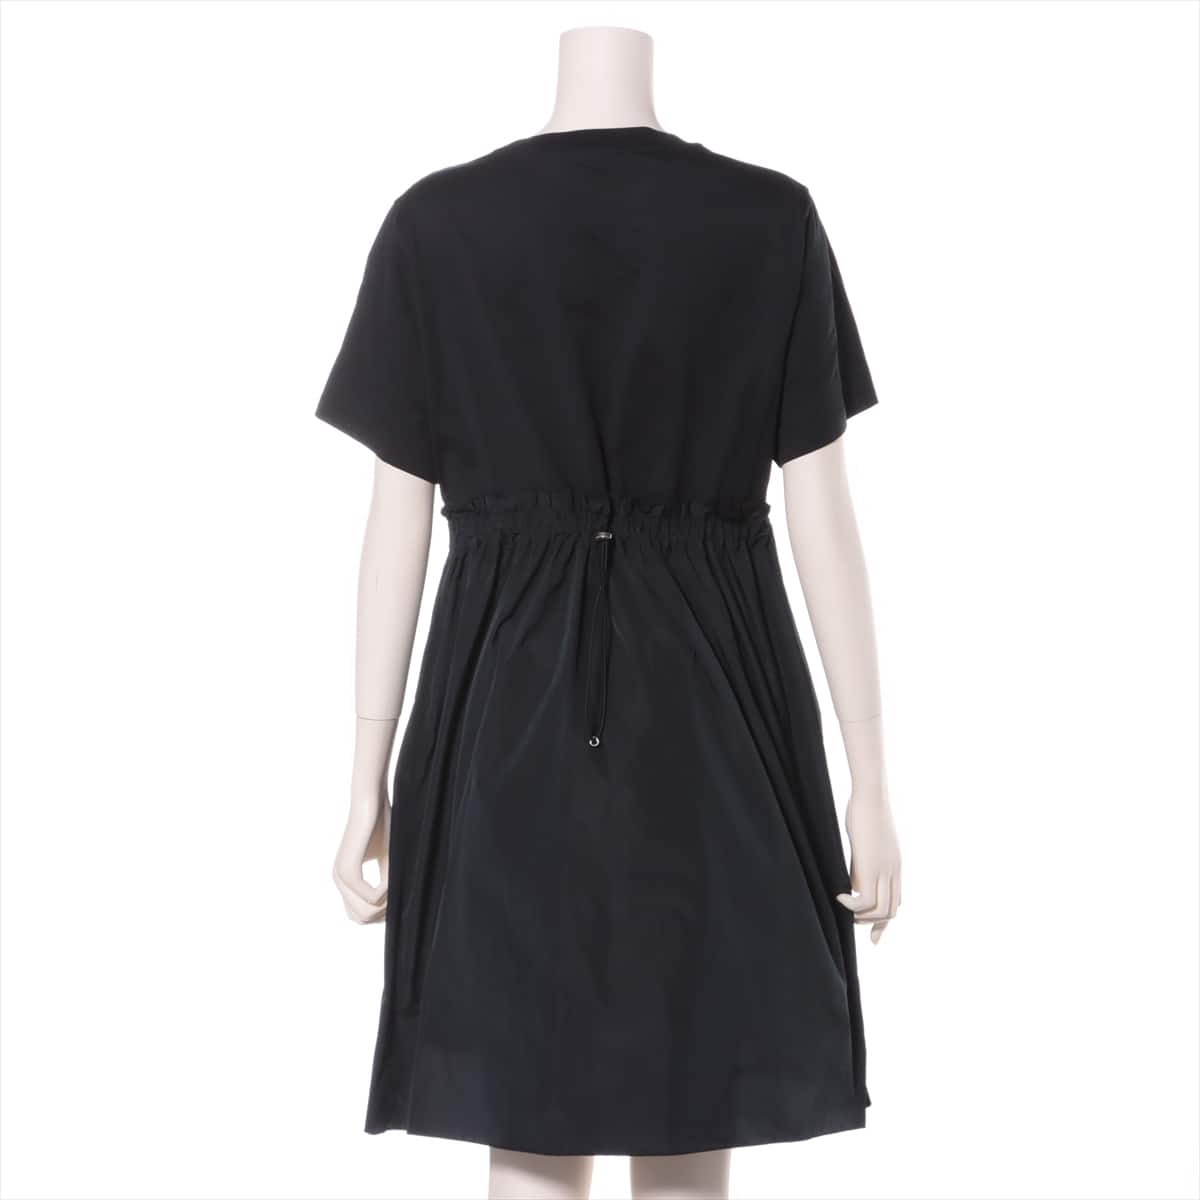 Moncler 18 years Cotton Dress S Ladies' Black  with back drawstring